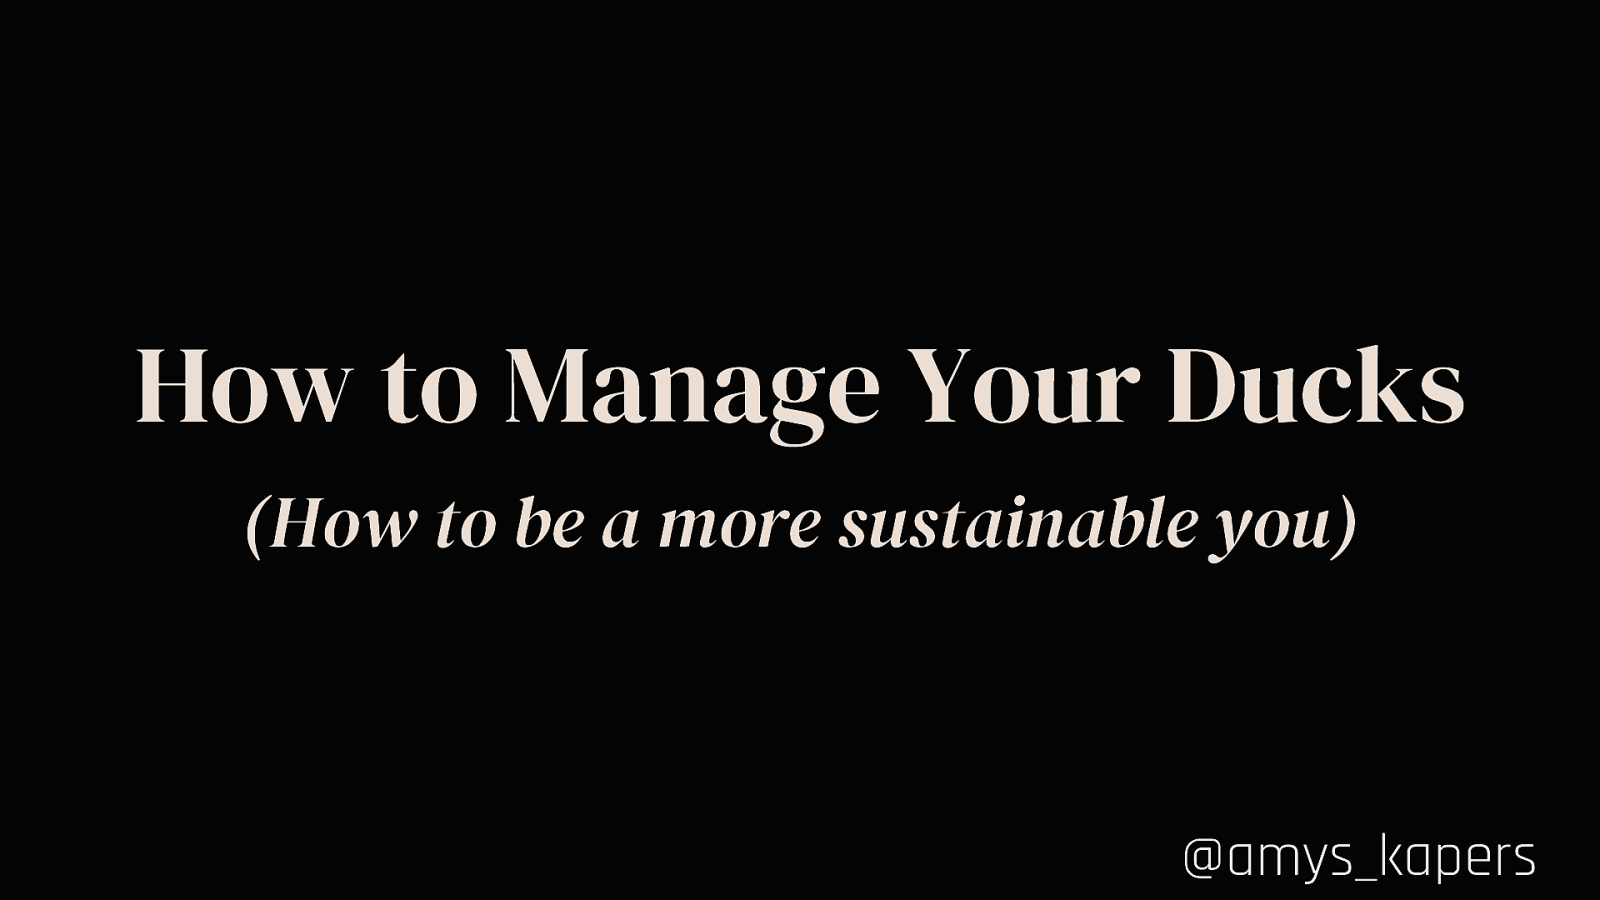 How to Manage your Ducks: Being a More Sustainable You